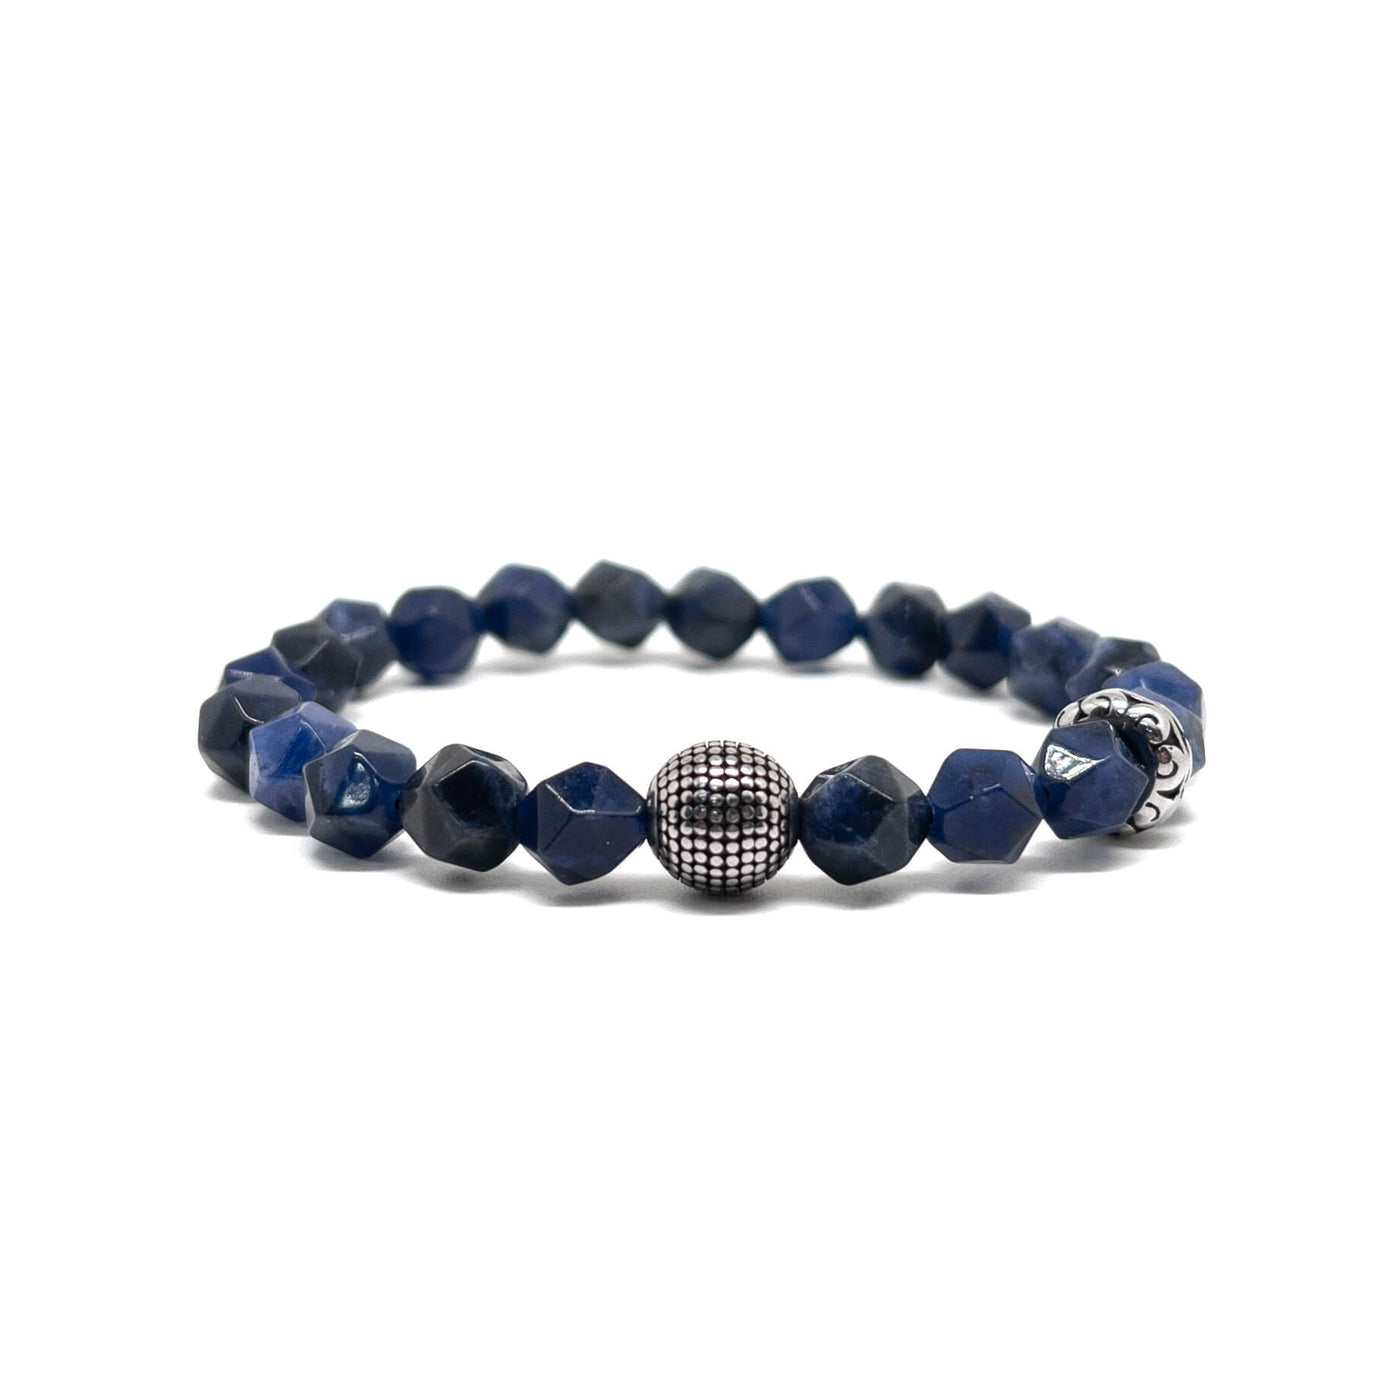 The Faceted Blue Sodalite  Stone and Silver Cylinder Bracelet